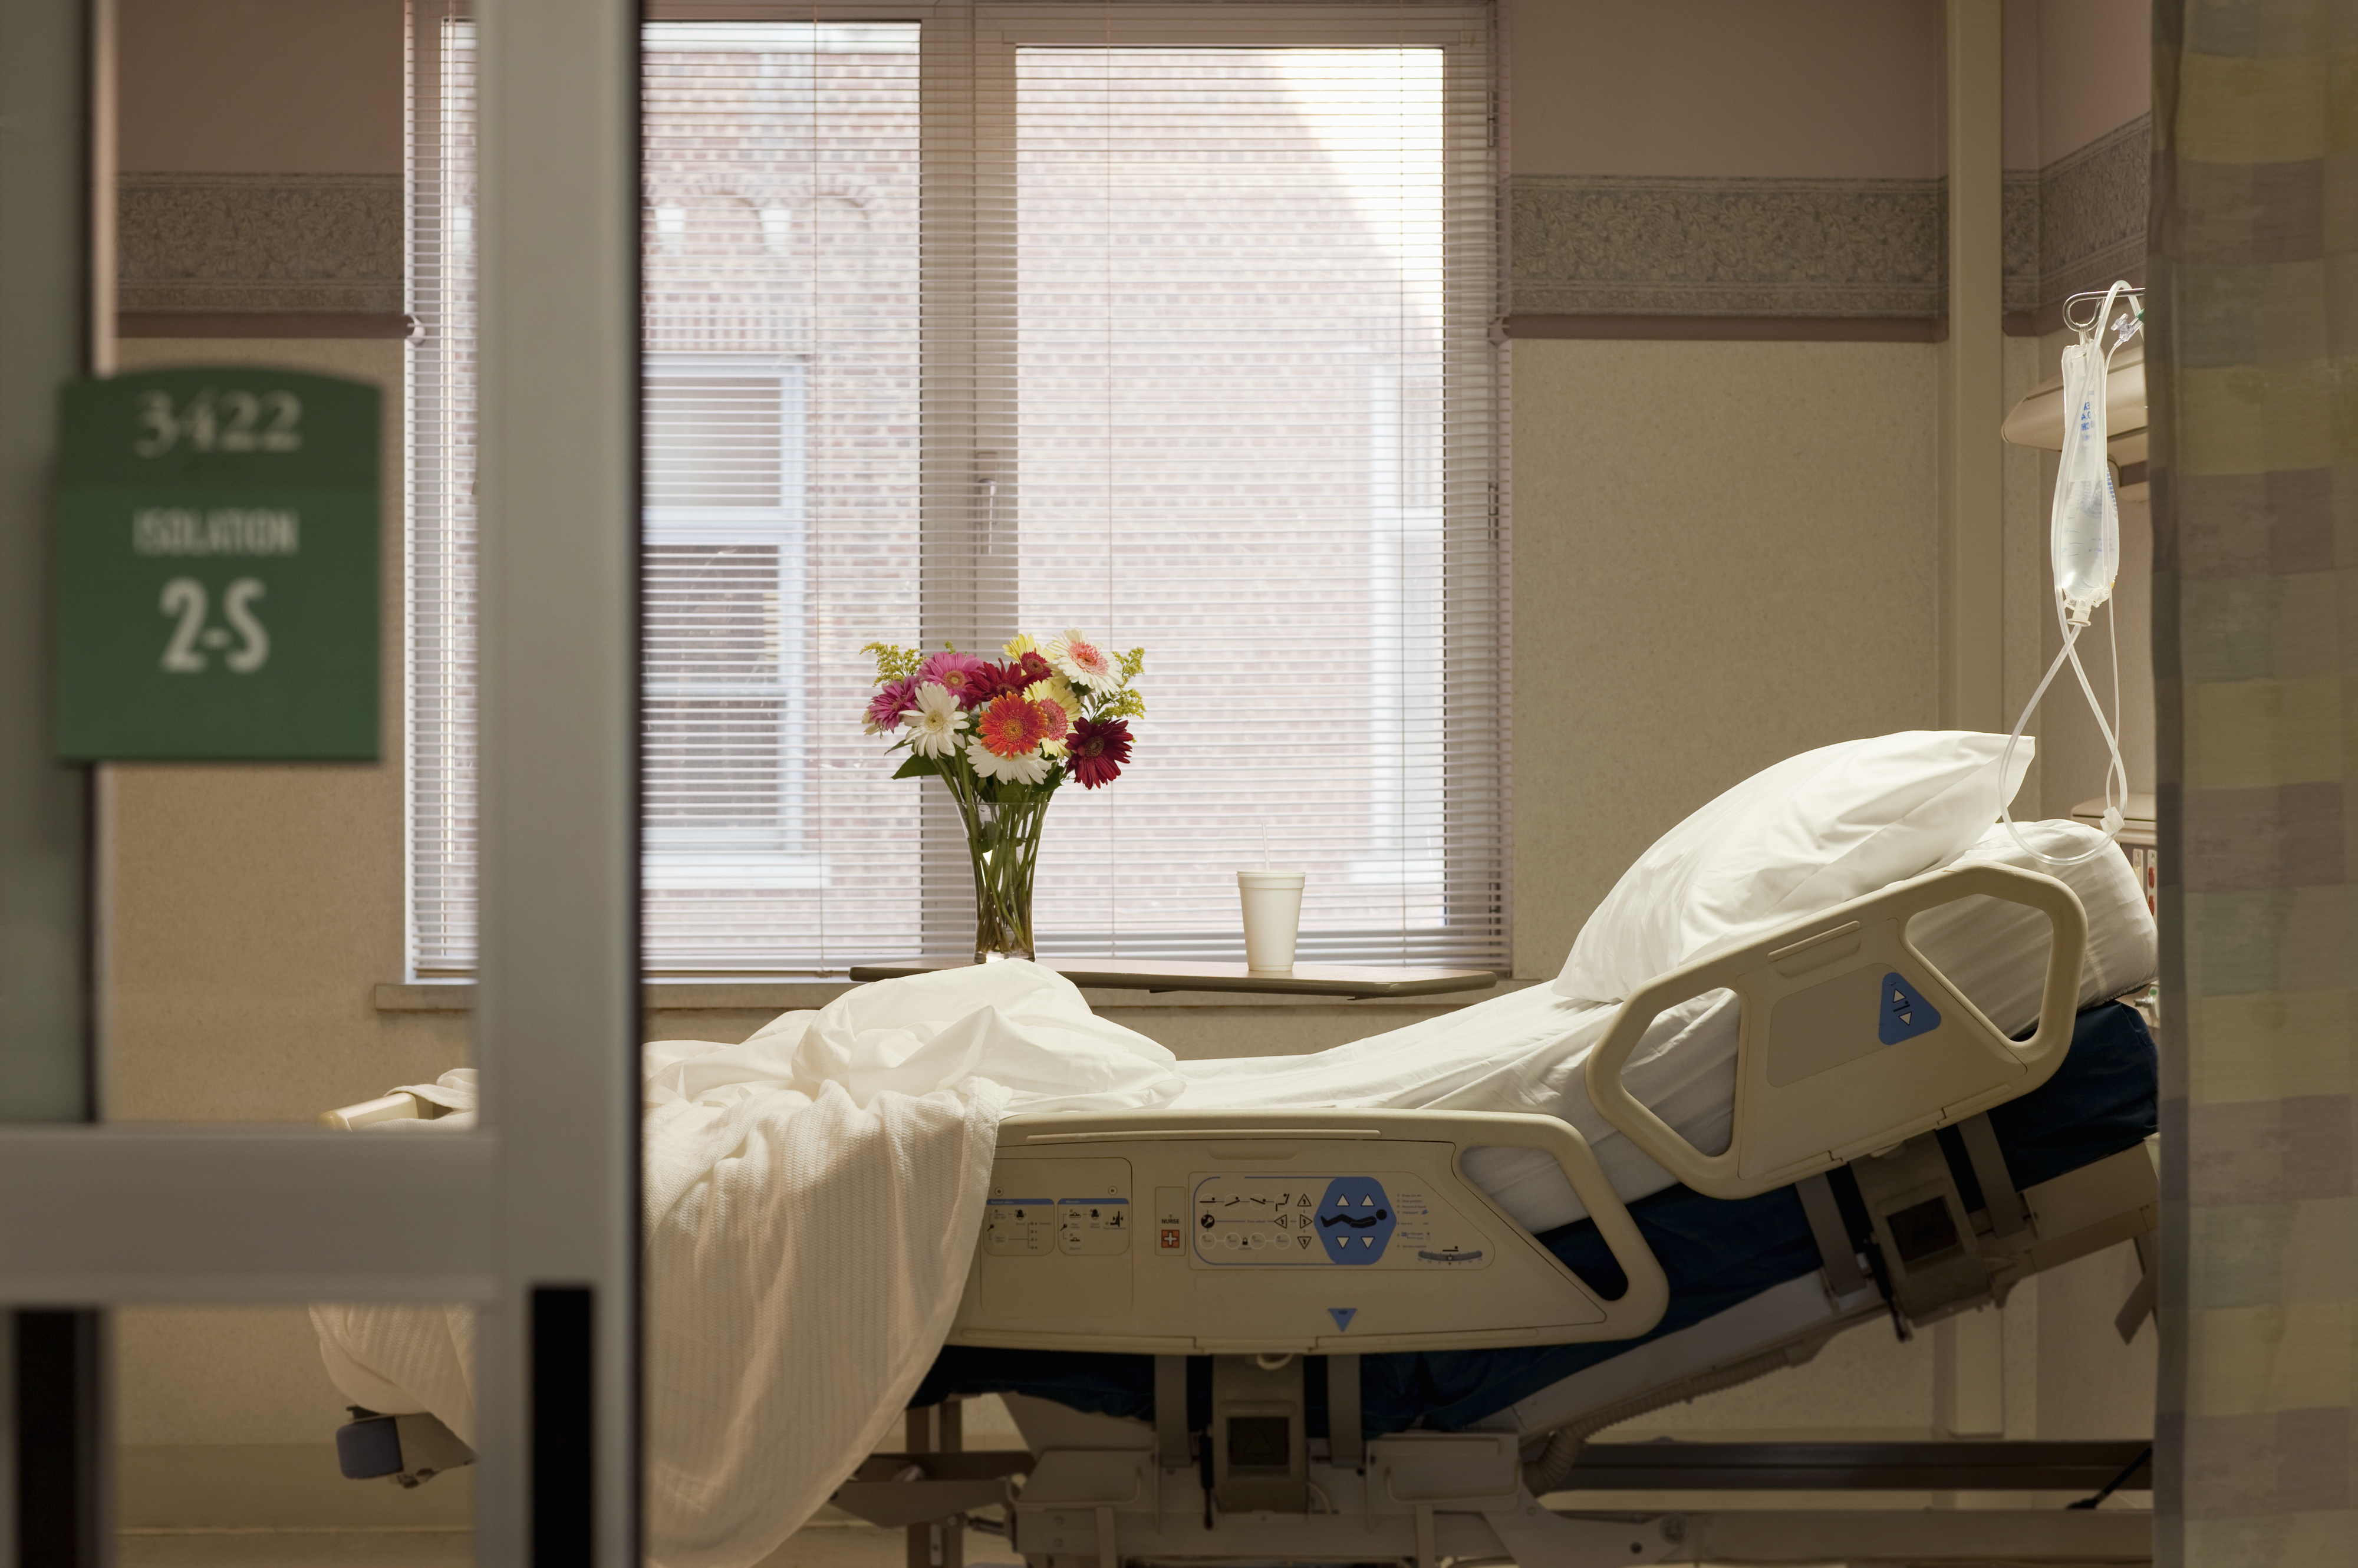 An empty hospital bed with a bouquet of flowers on the windowsill in a hospital room